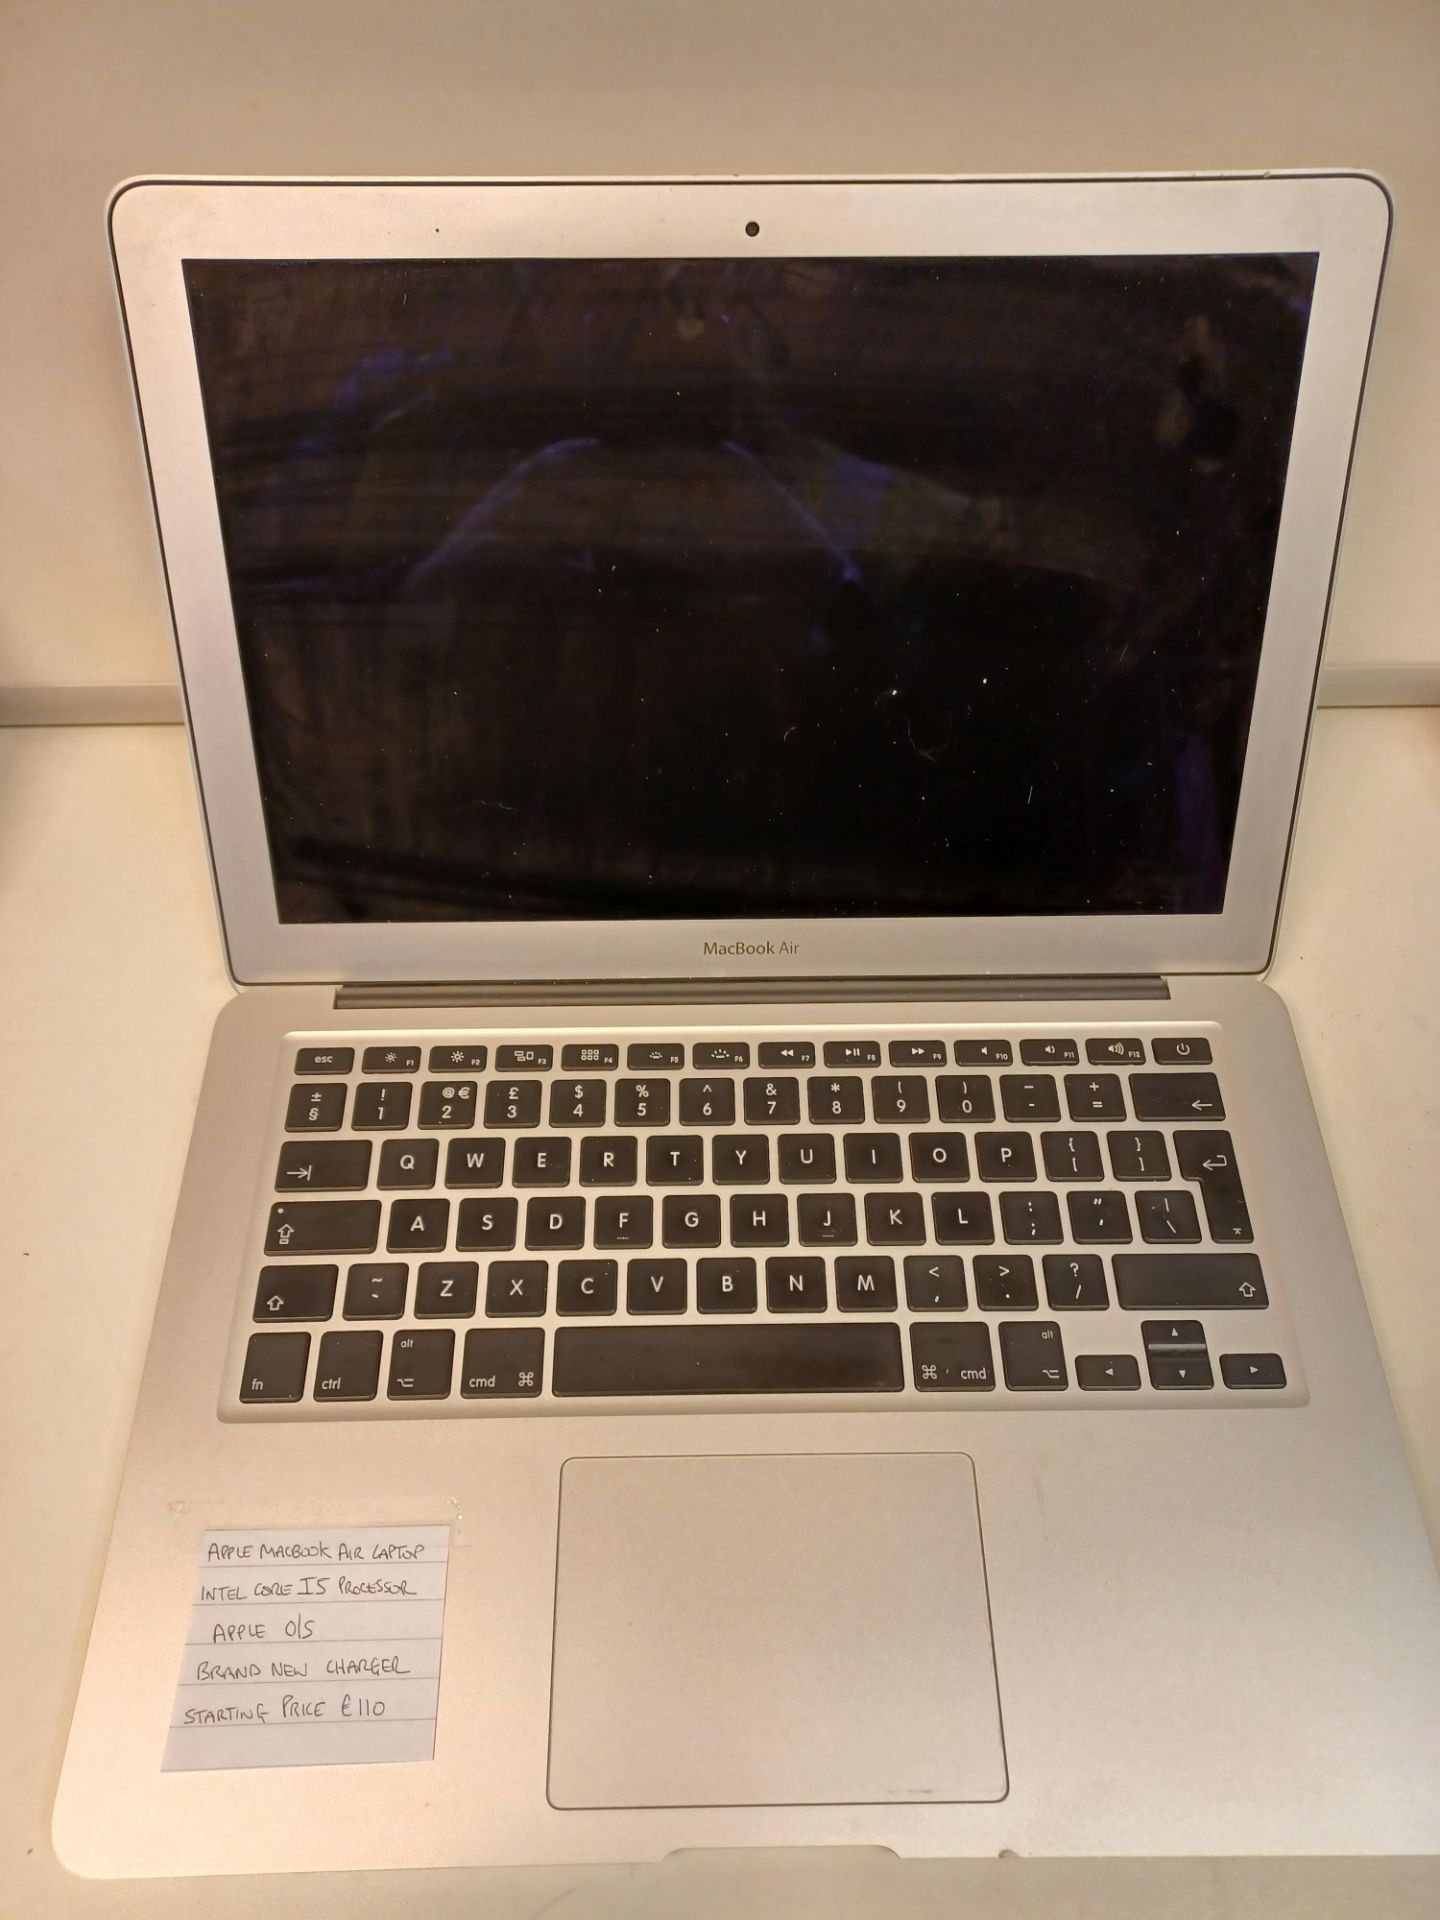 APPLE MACBOOK AIR LAPTOP, INTEL CORE I5 PROCESSOR,APPLE O/S, BRAND NEW CHARGER